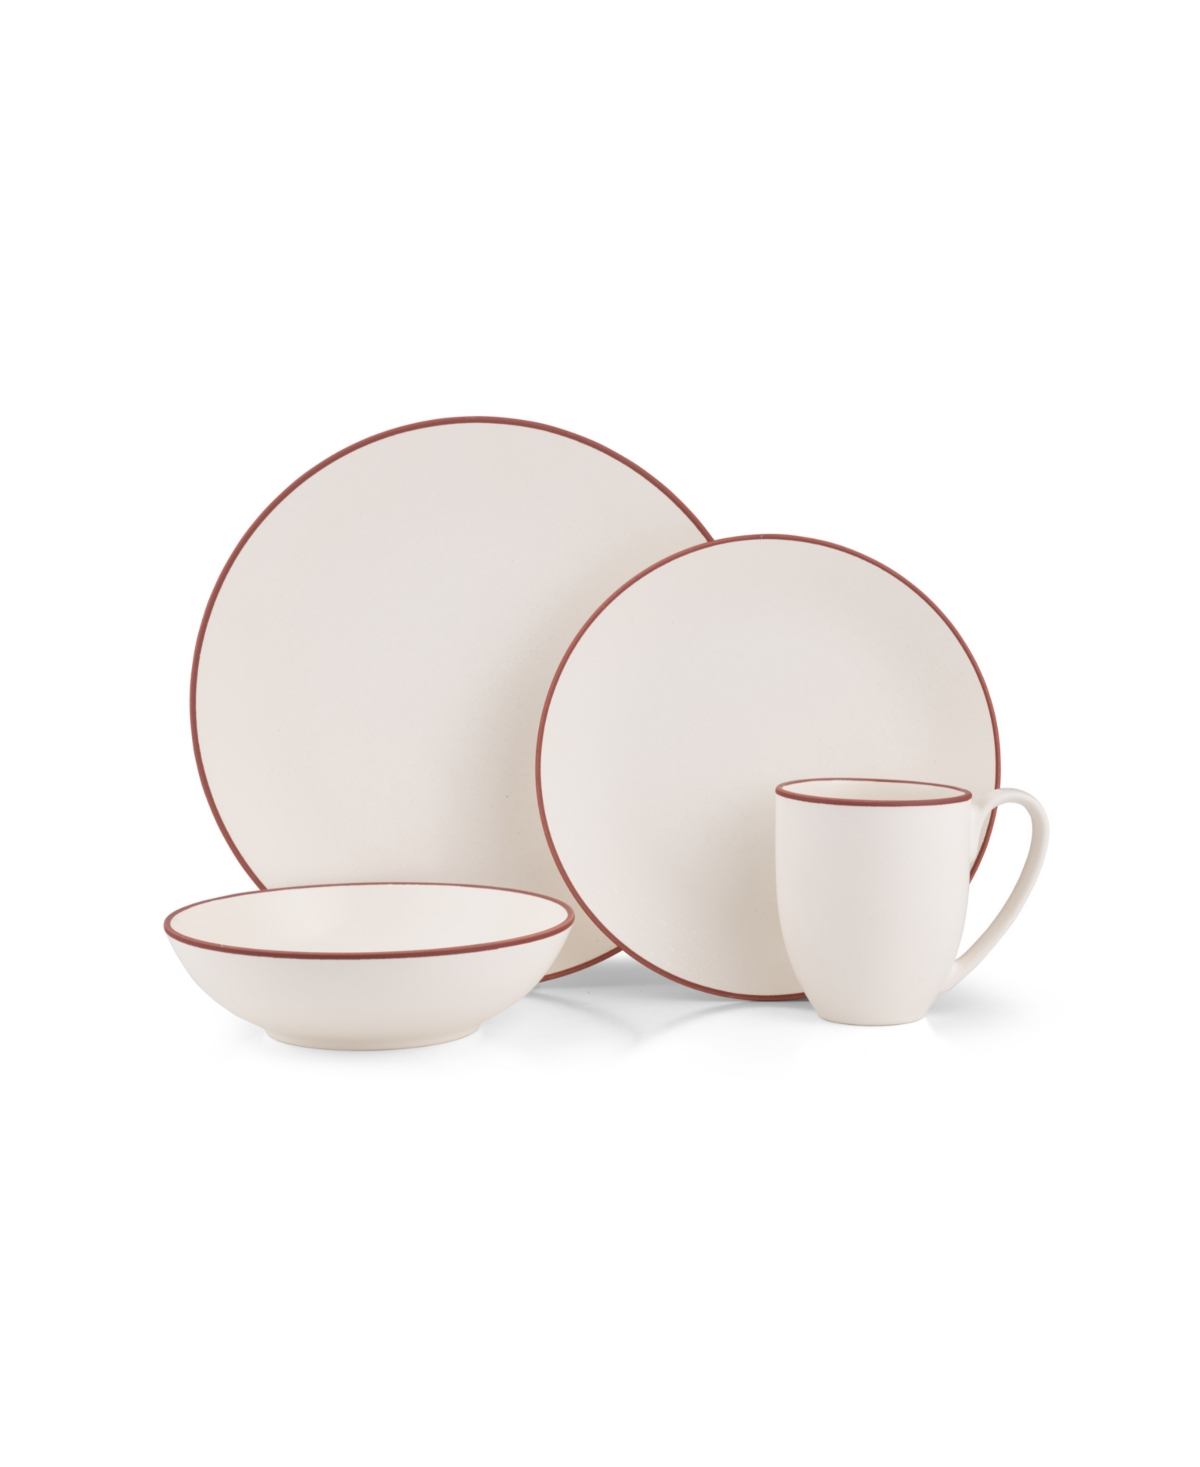 Nambe Taos 4 Piece Place Setting In White